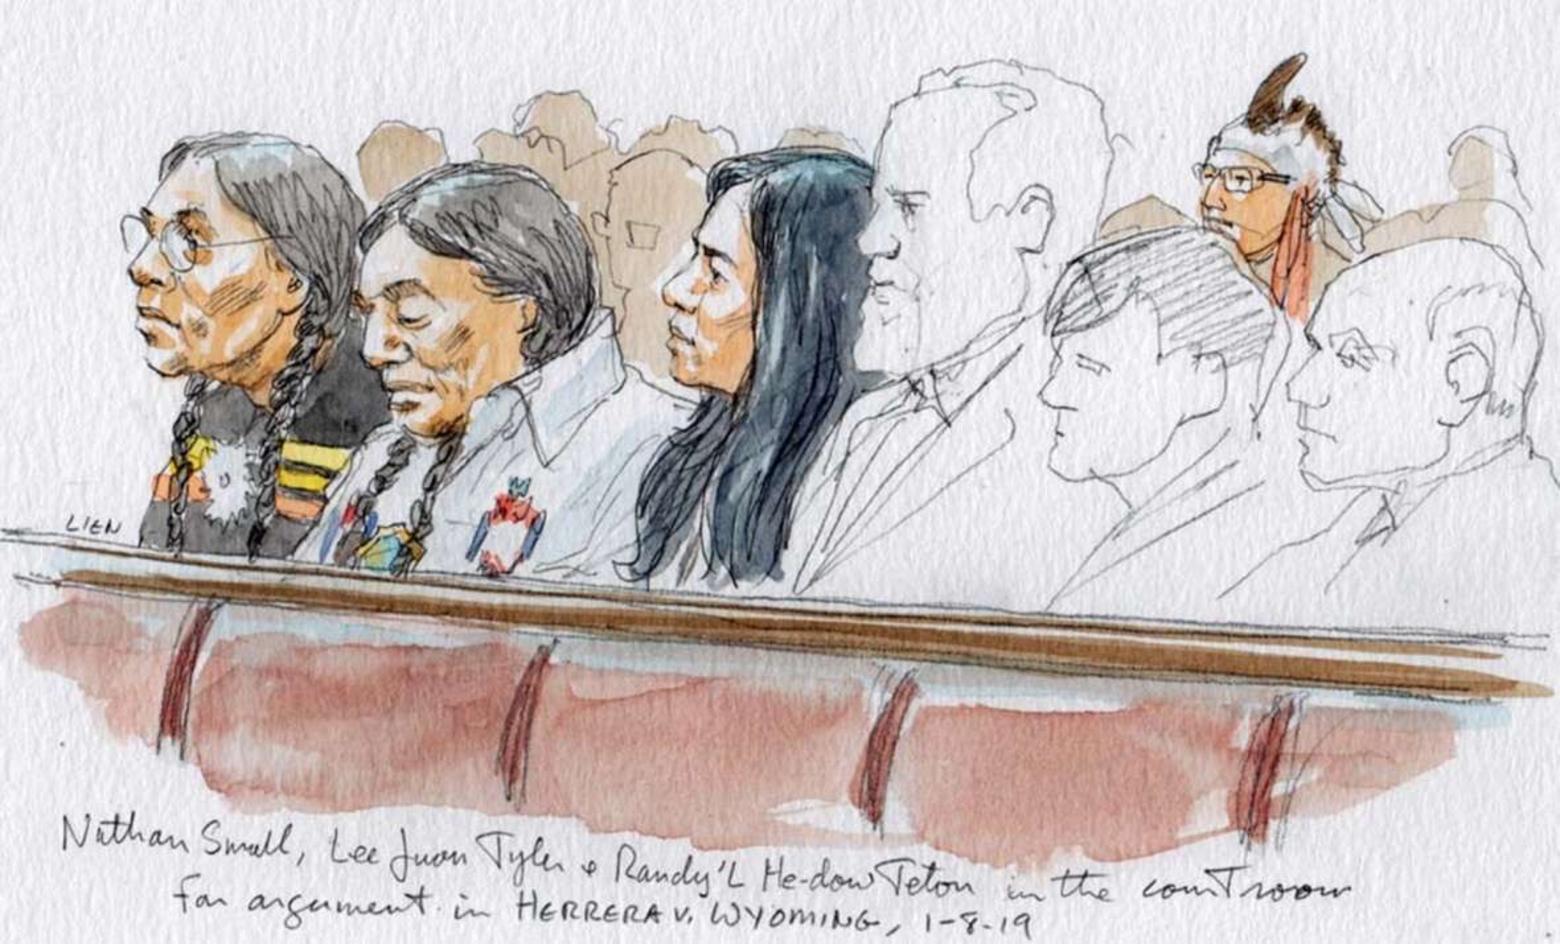 Crow Nation members nathan Small, Lee Juan Tyler and Randy'L He-dow Teton listen to organ arguments in the Herrera case at the US Supreme Court, January 2019, in Herrera v. Wyoming. Image courtesy SCOTUSblog